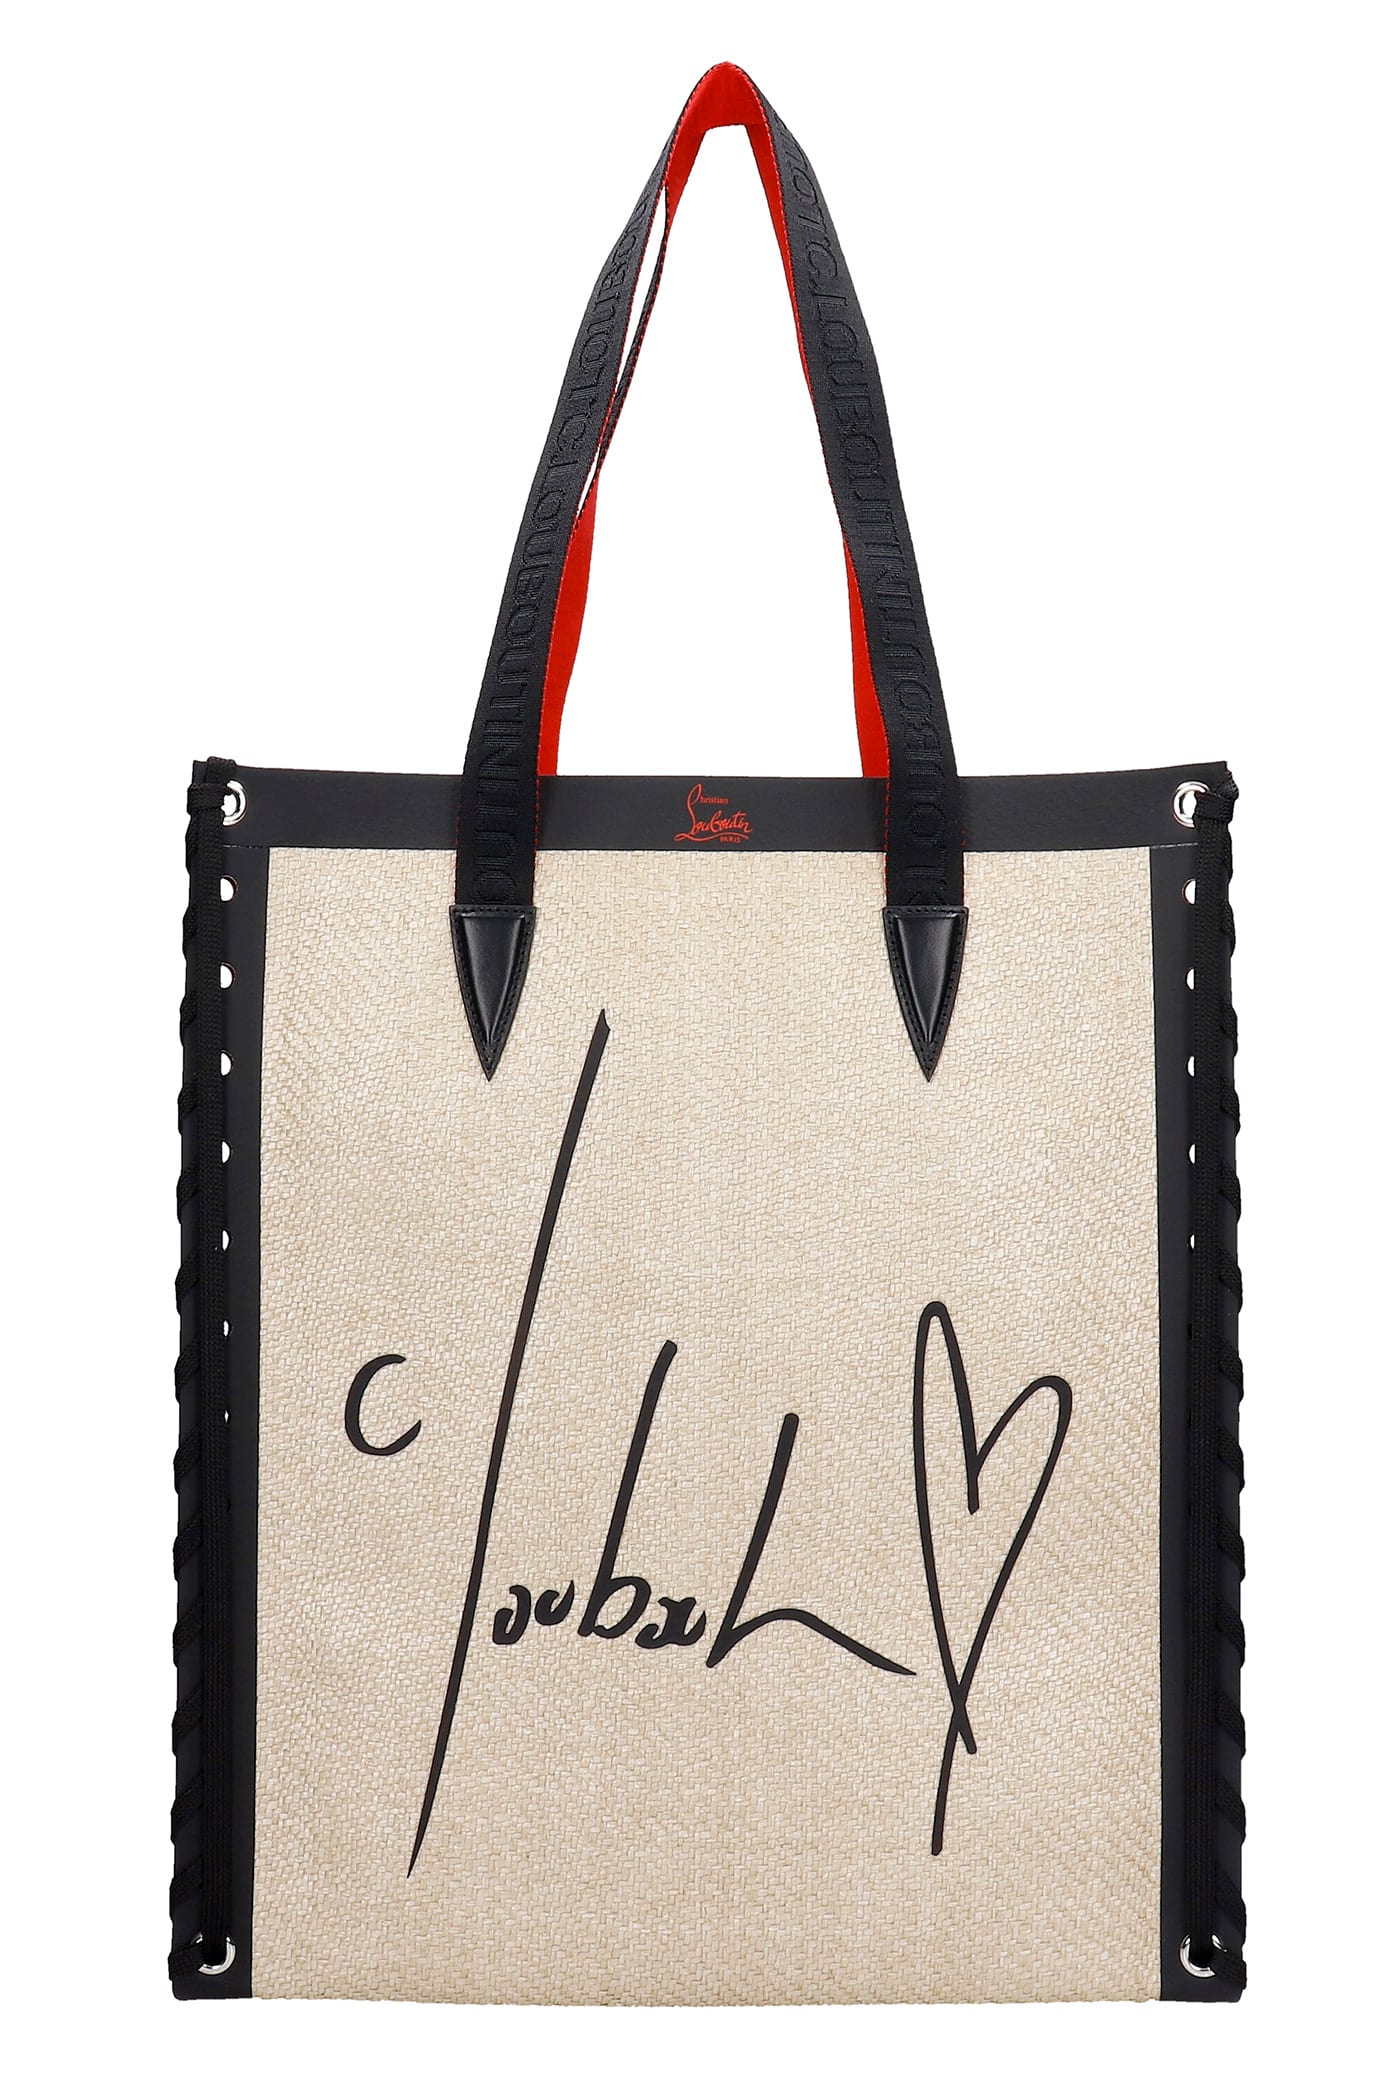 Christian Louboutin Cabalace Tote In Beige Canvas